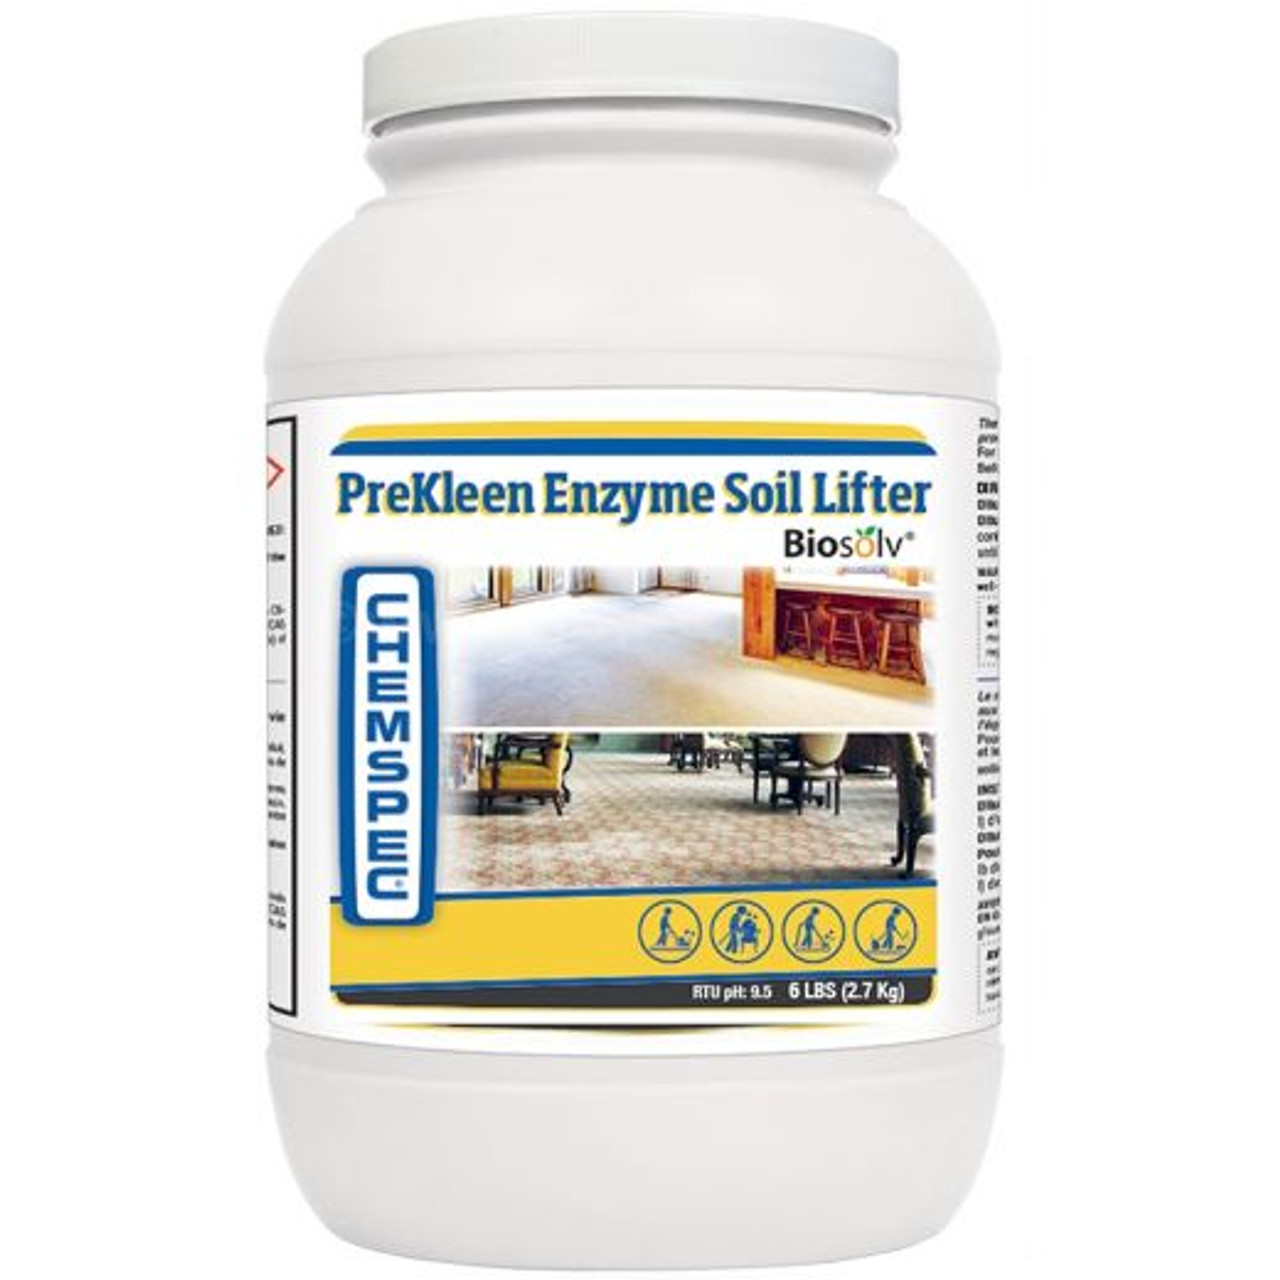 Chemspec PreKleen Enzyme Soil Lifter with Biosolv - 6lbs - CASE of 4ea